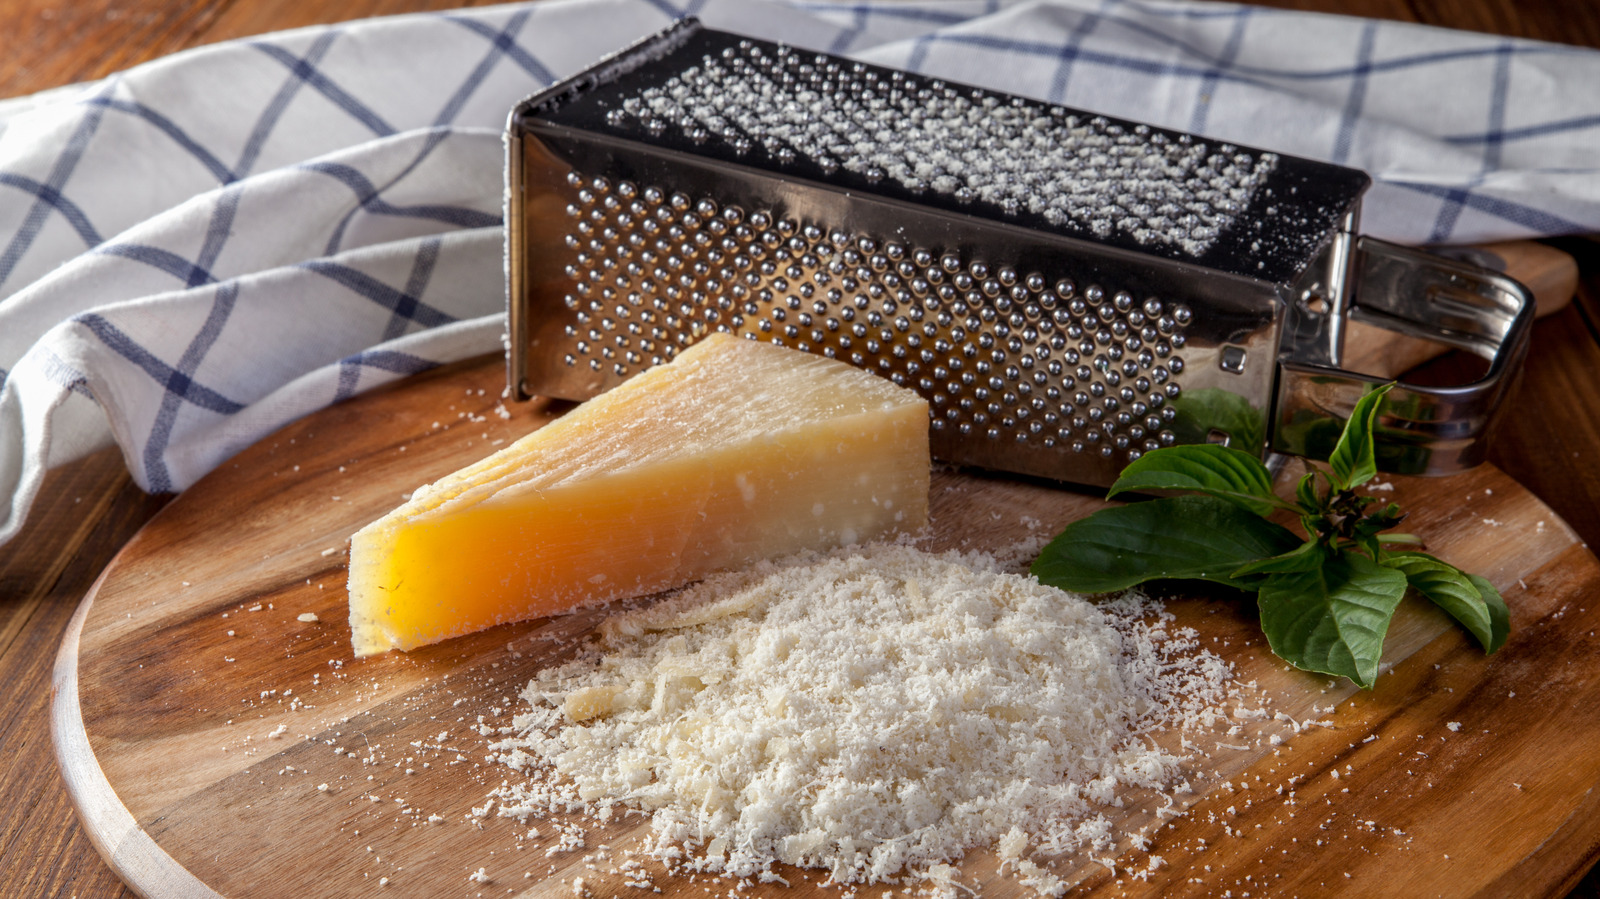 https://www.foodrepublic.com/img/gallery/the-mess-free-cheese-grater-hack-thats-too-easy-not-to-try/l-intro-1699021013.jpg